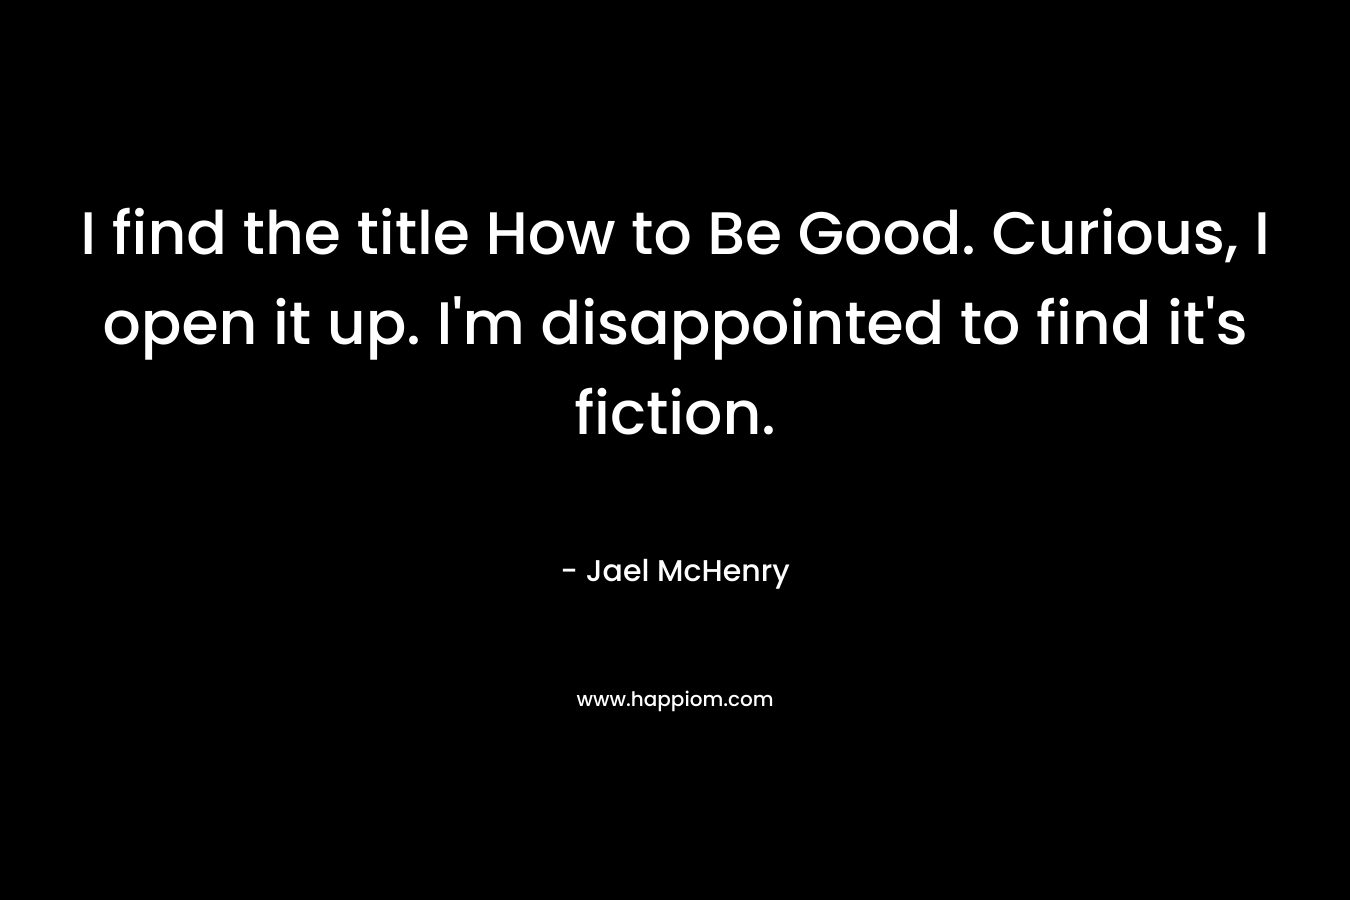 I find the title How to Be Good. Curious, I open it up. I’m disappointed to find it’s fiction. – Jael McHenry